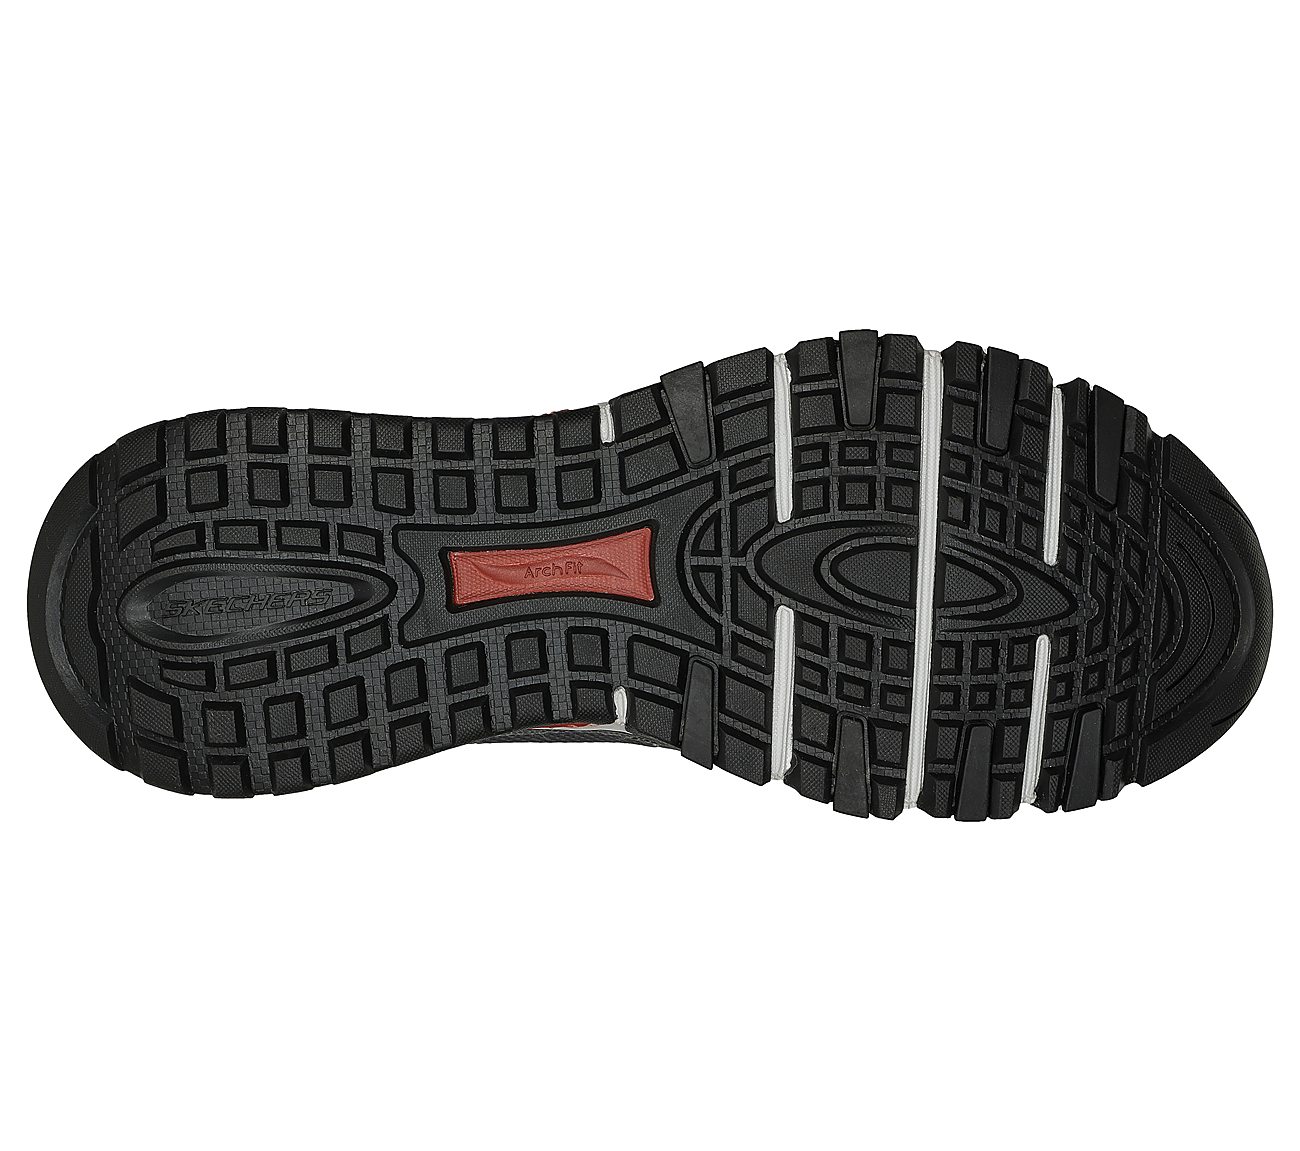 ARCH FIT ESCAPE PLAN, NAVY/CHARCOAL Footwear Bottom View